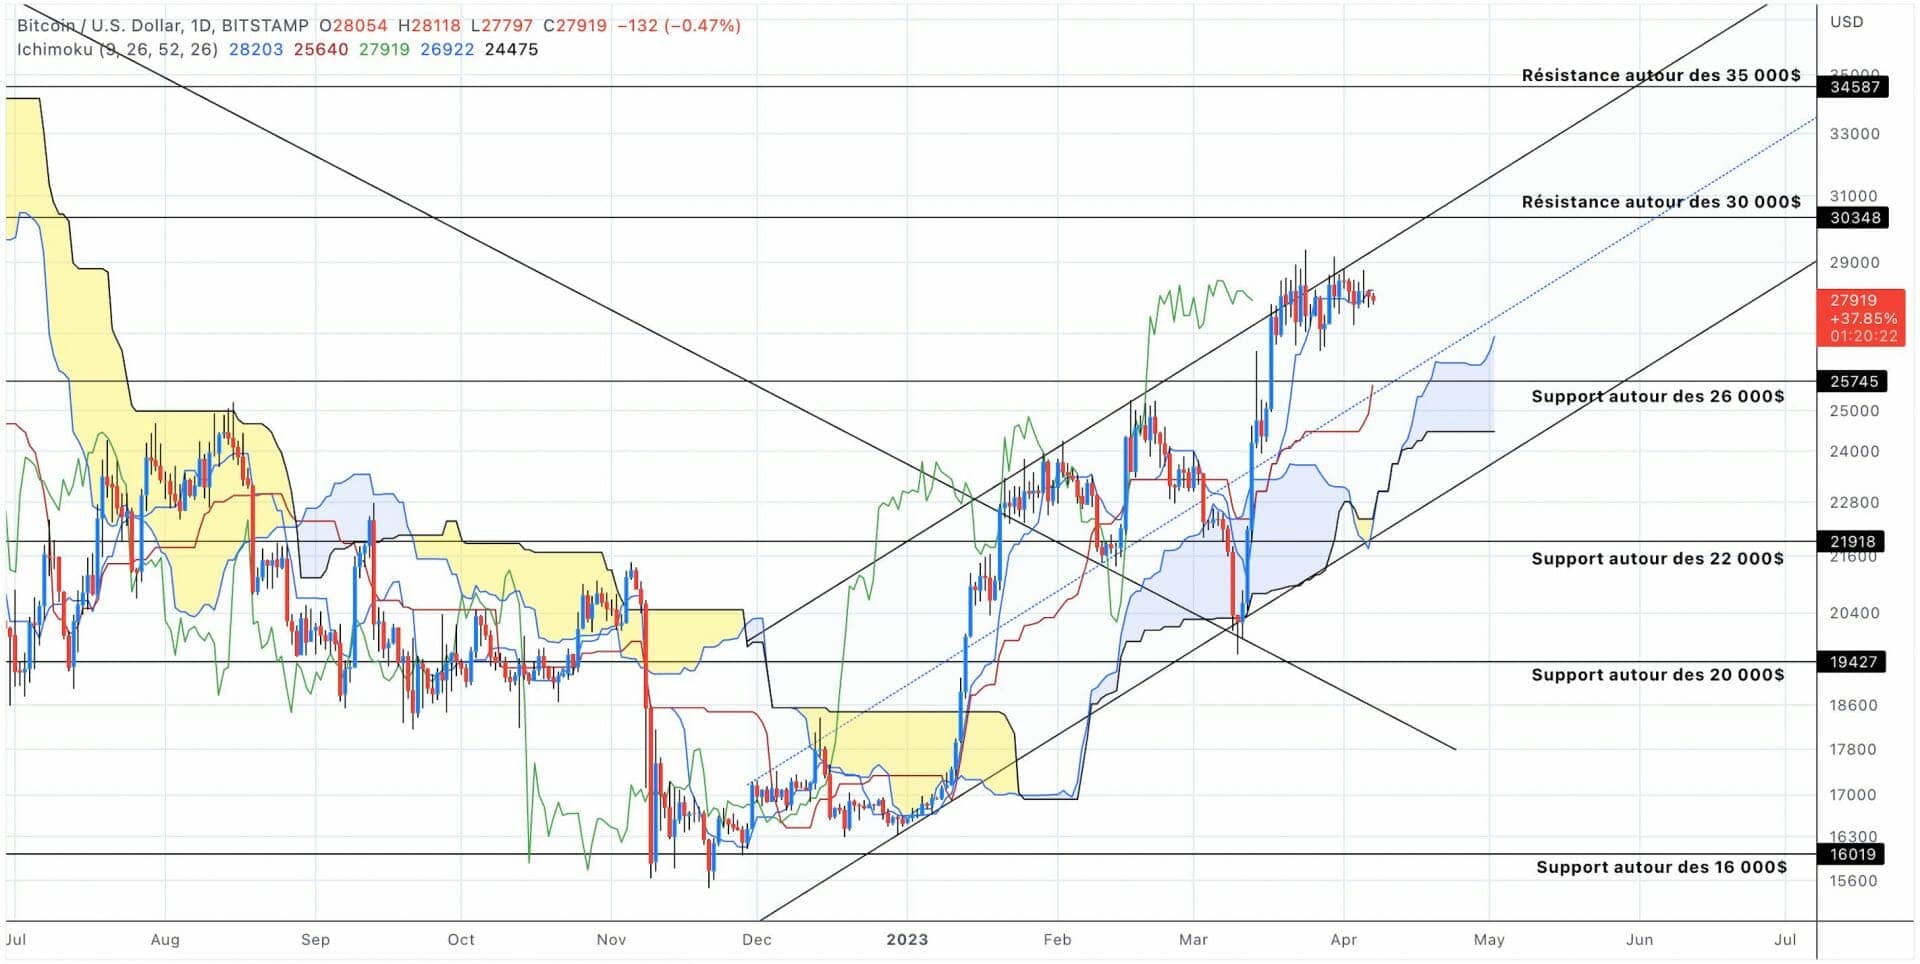 Bitcoin price analysis in daily units - April 08, 2023